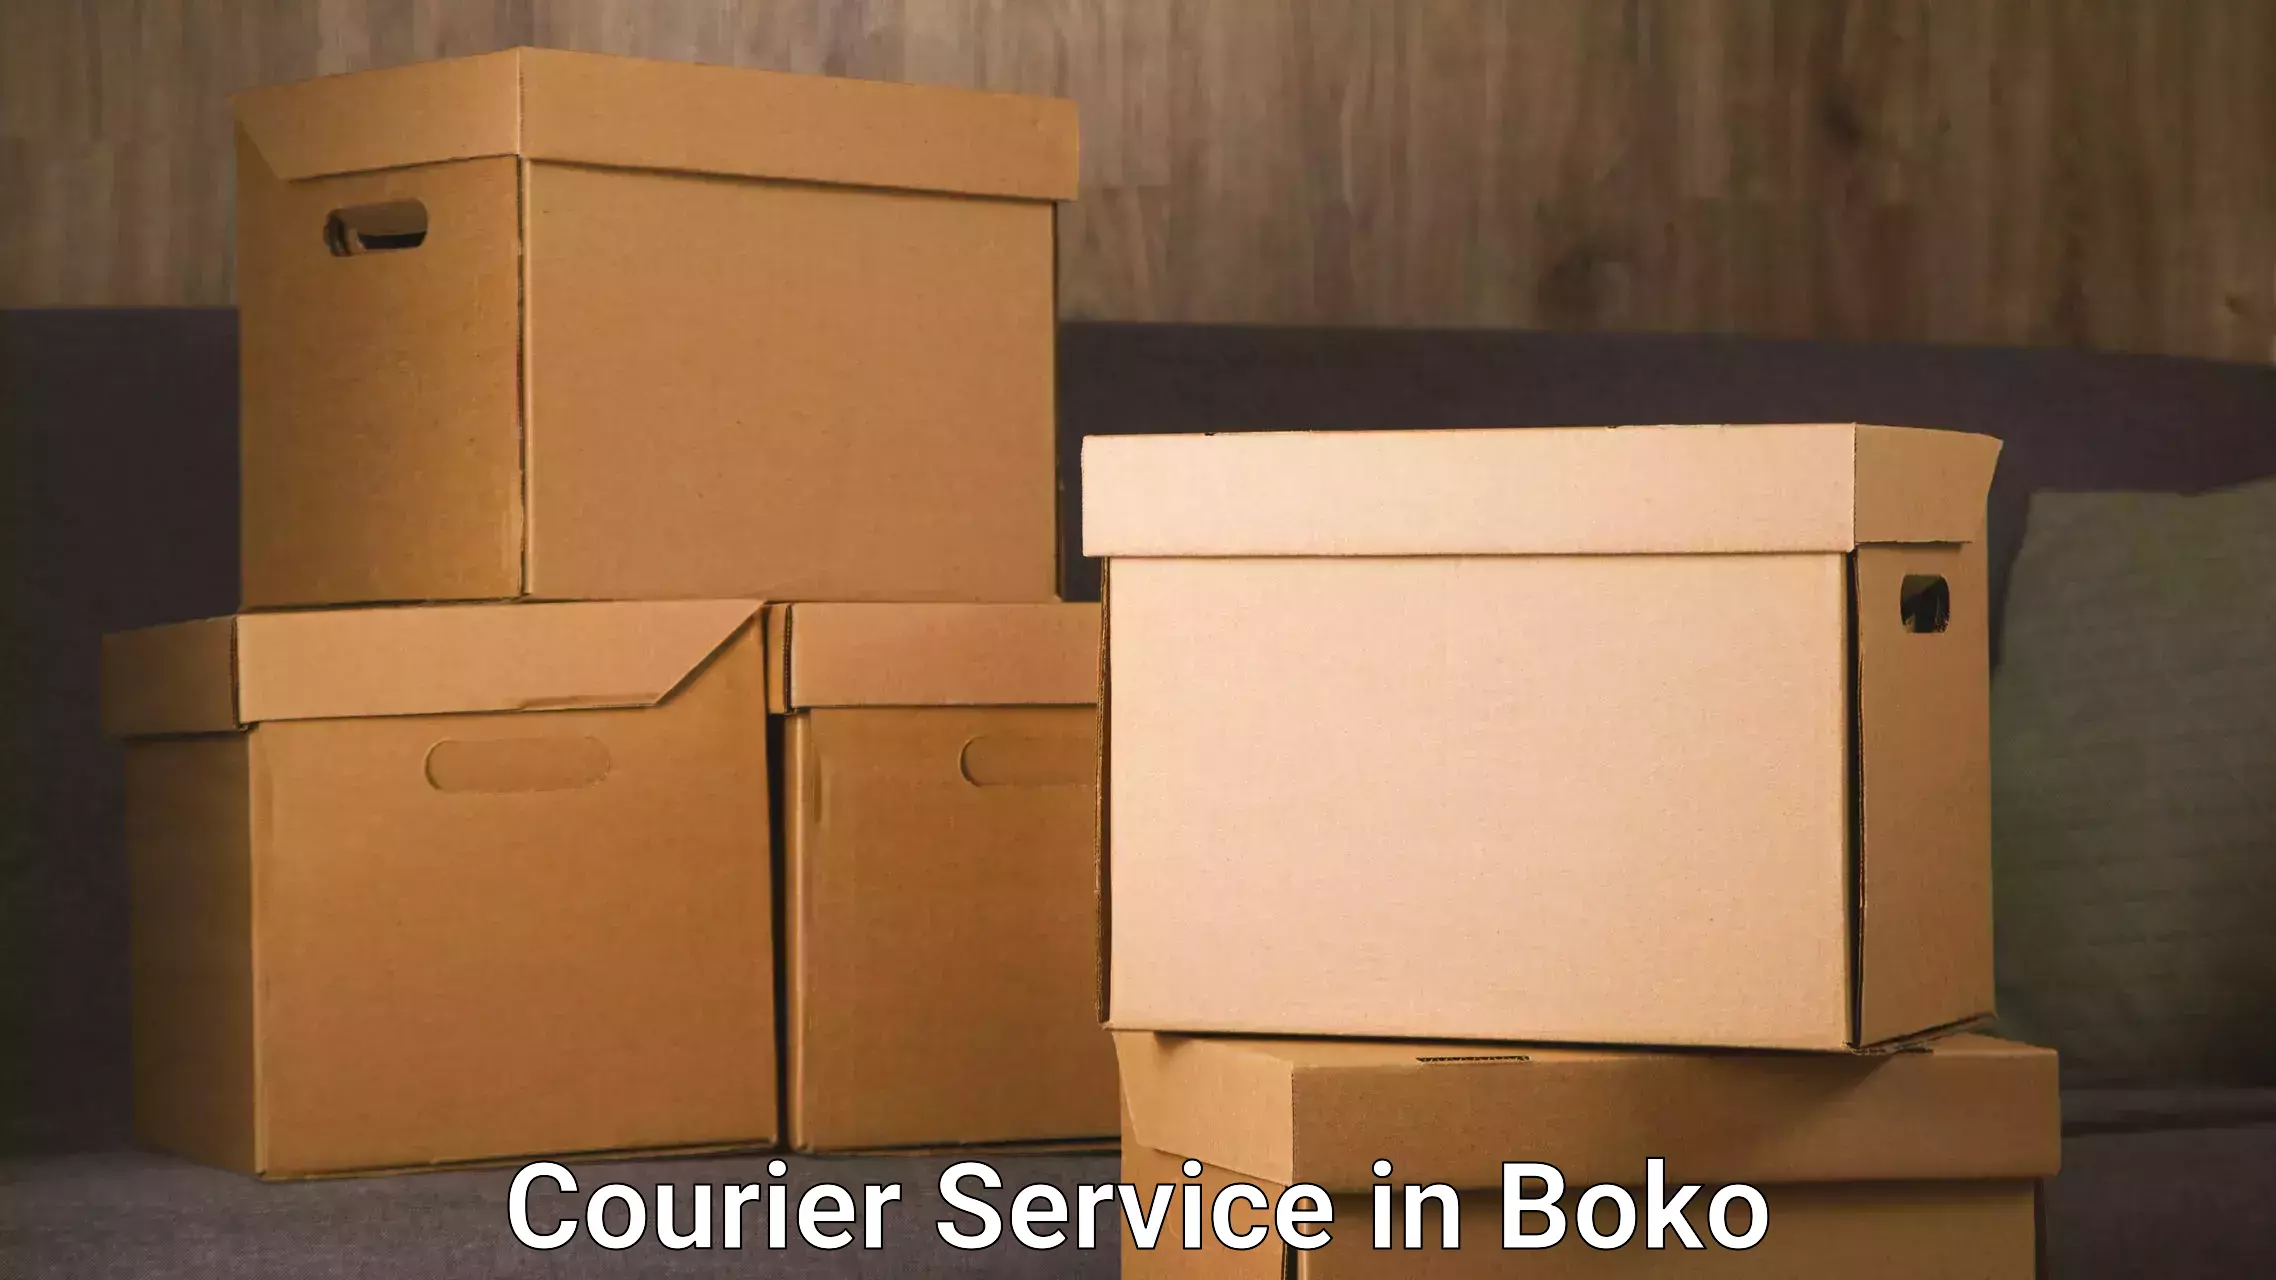 Logistics and distribution in Boko